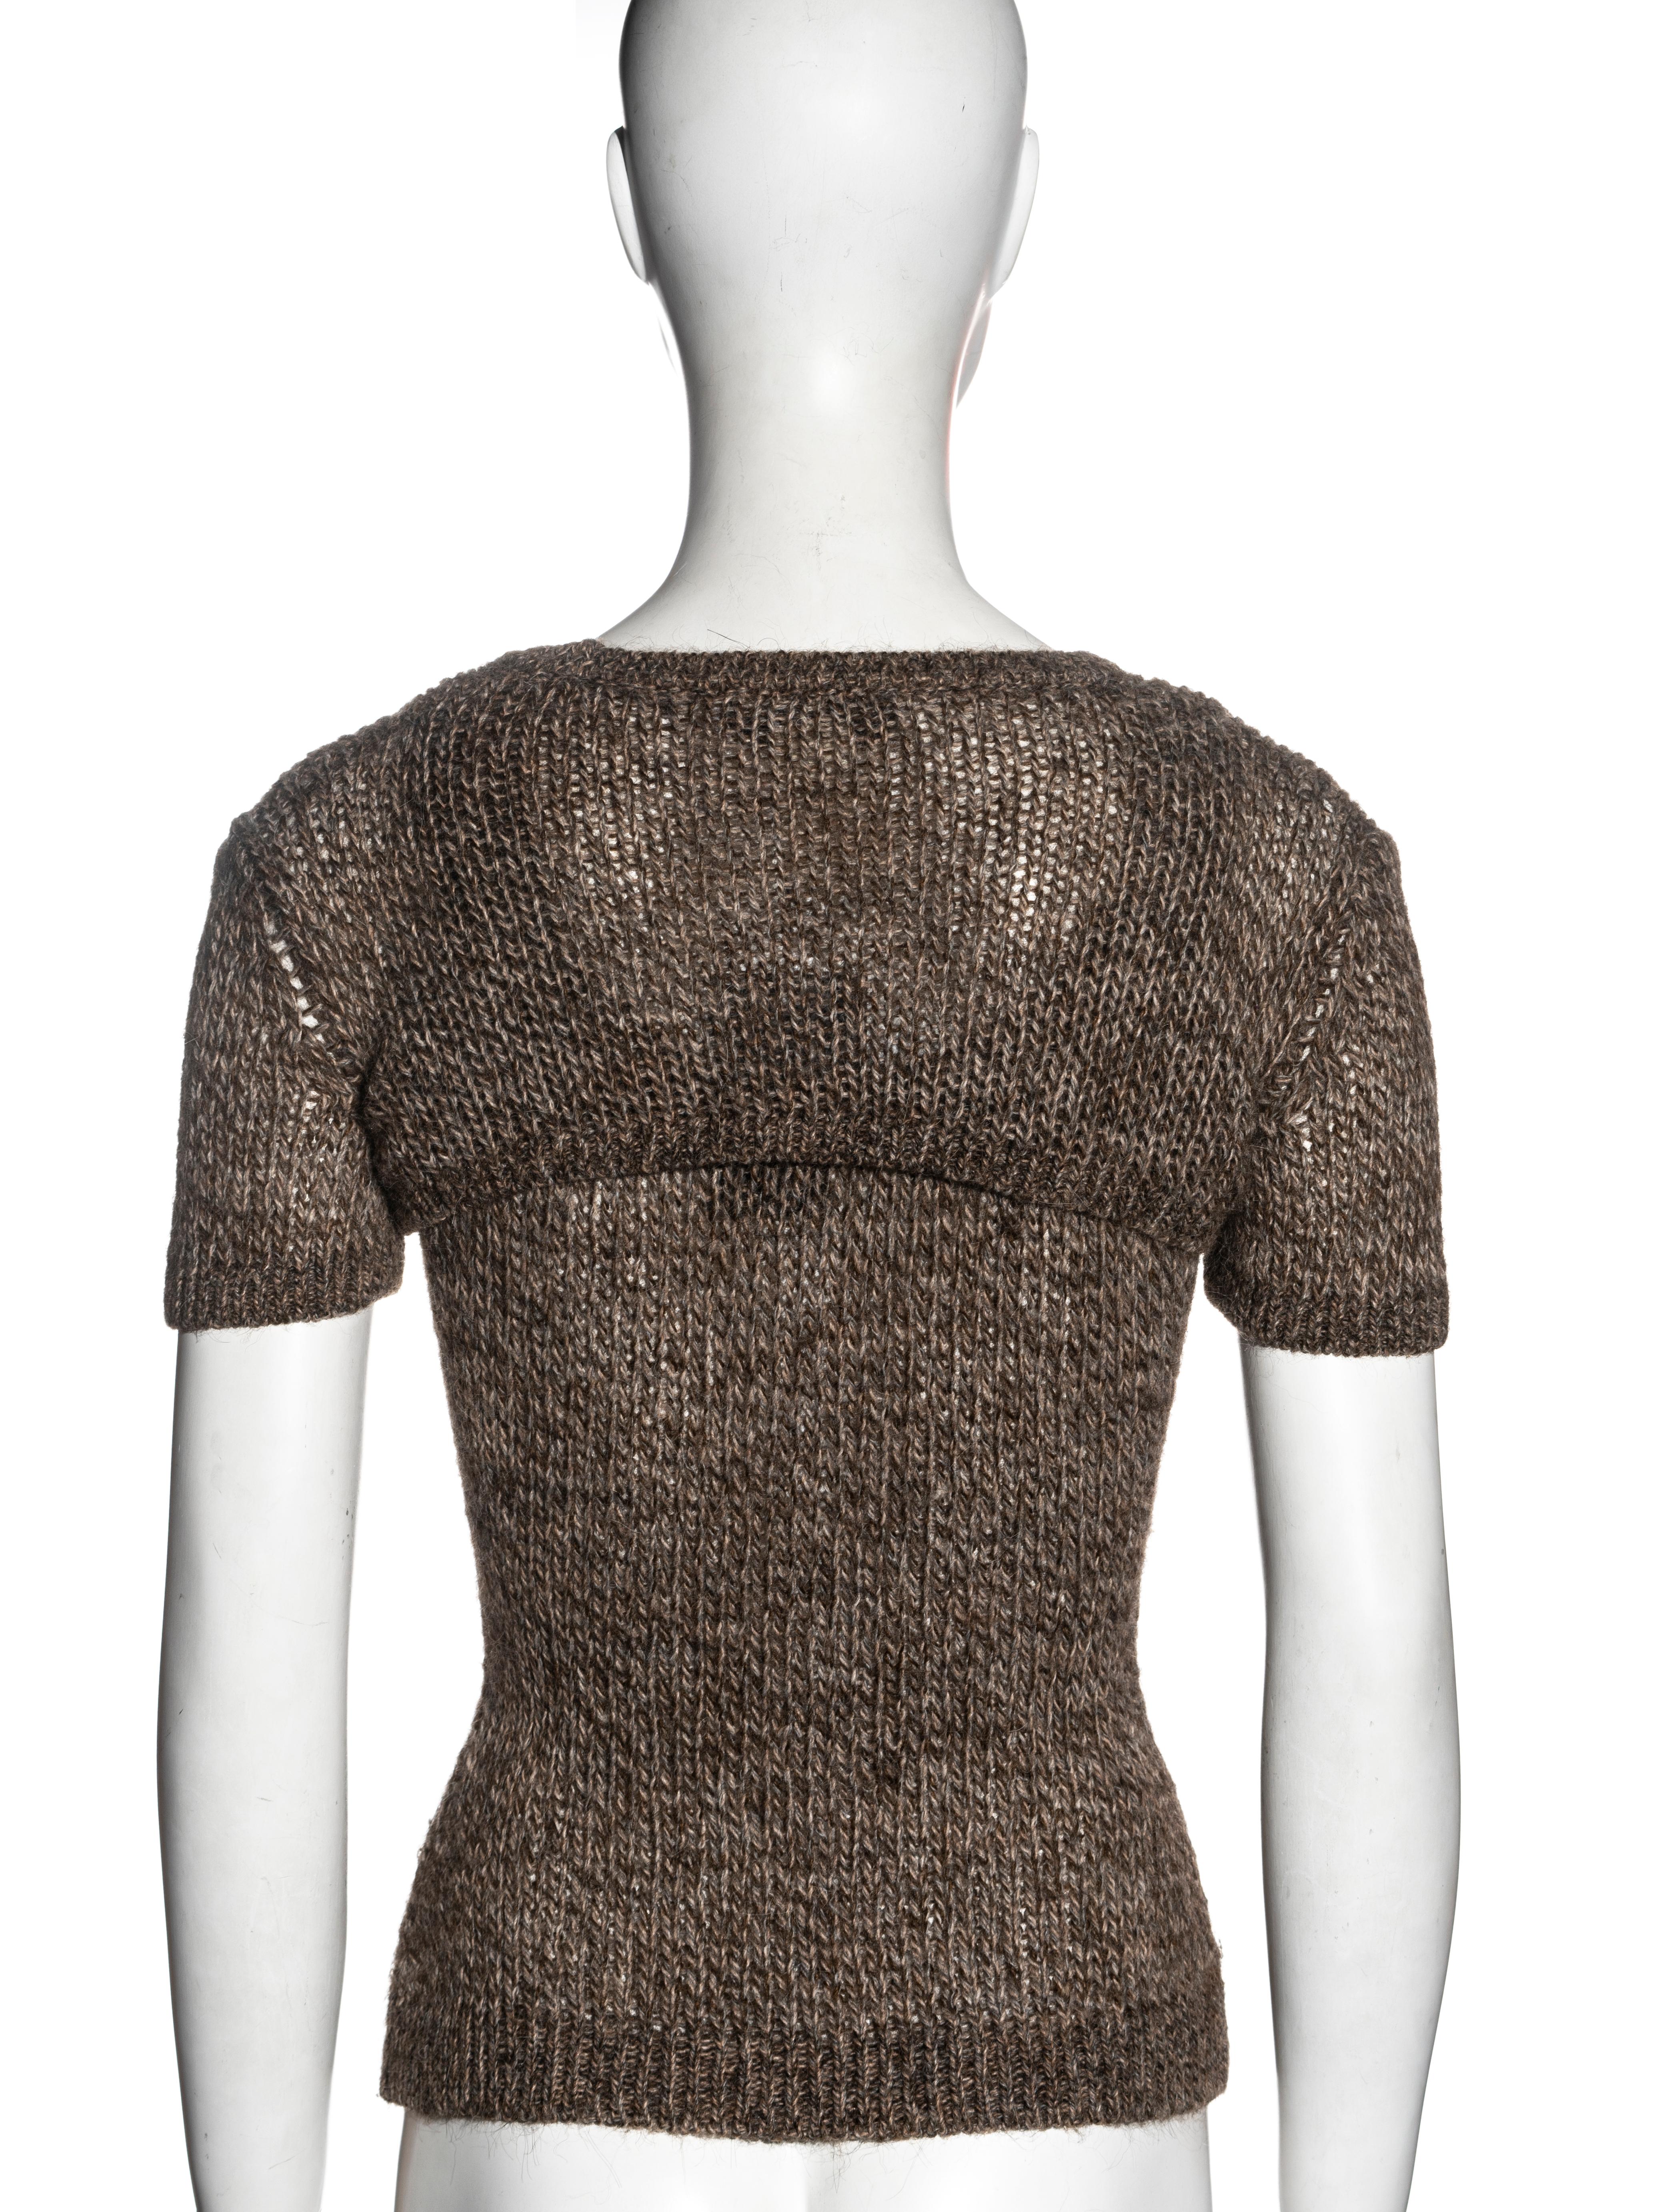 Dolce & Gabbana brown knitted tank and crop top set, ss 1999 3